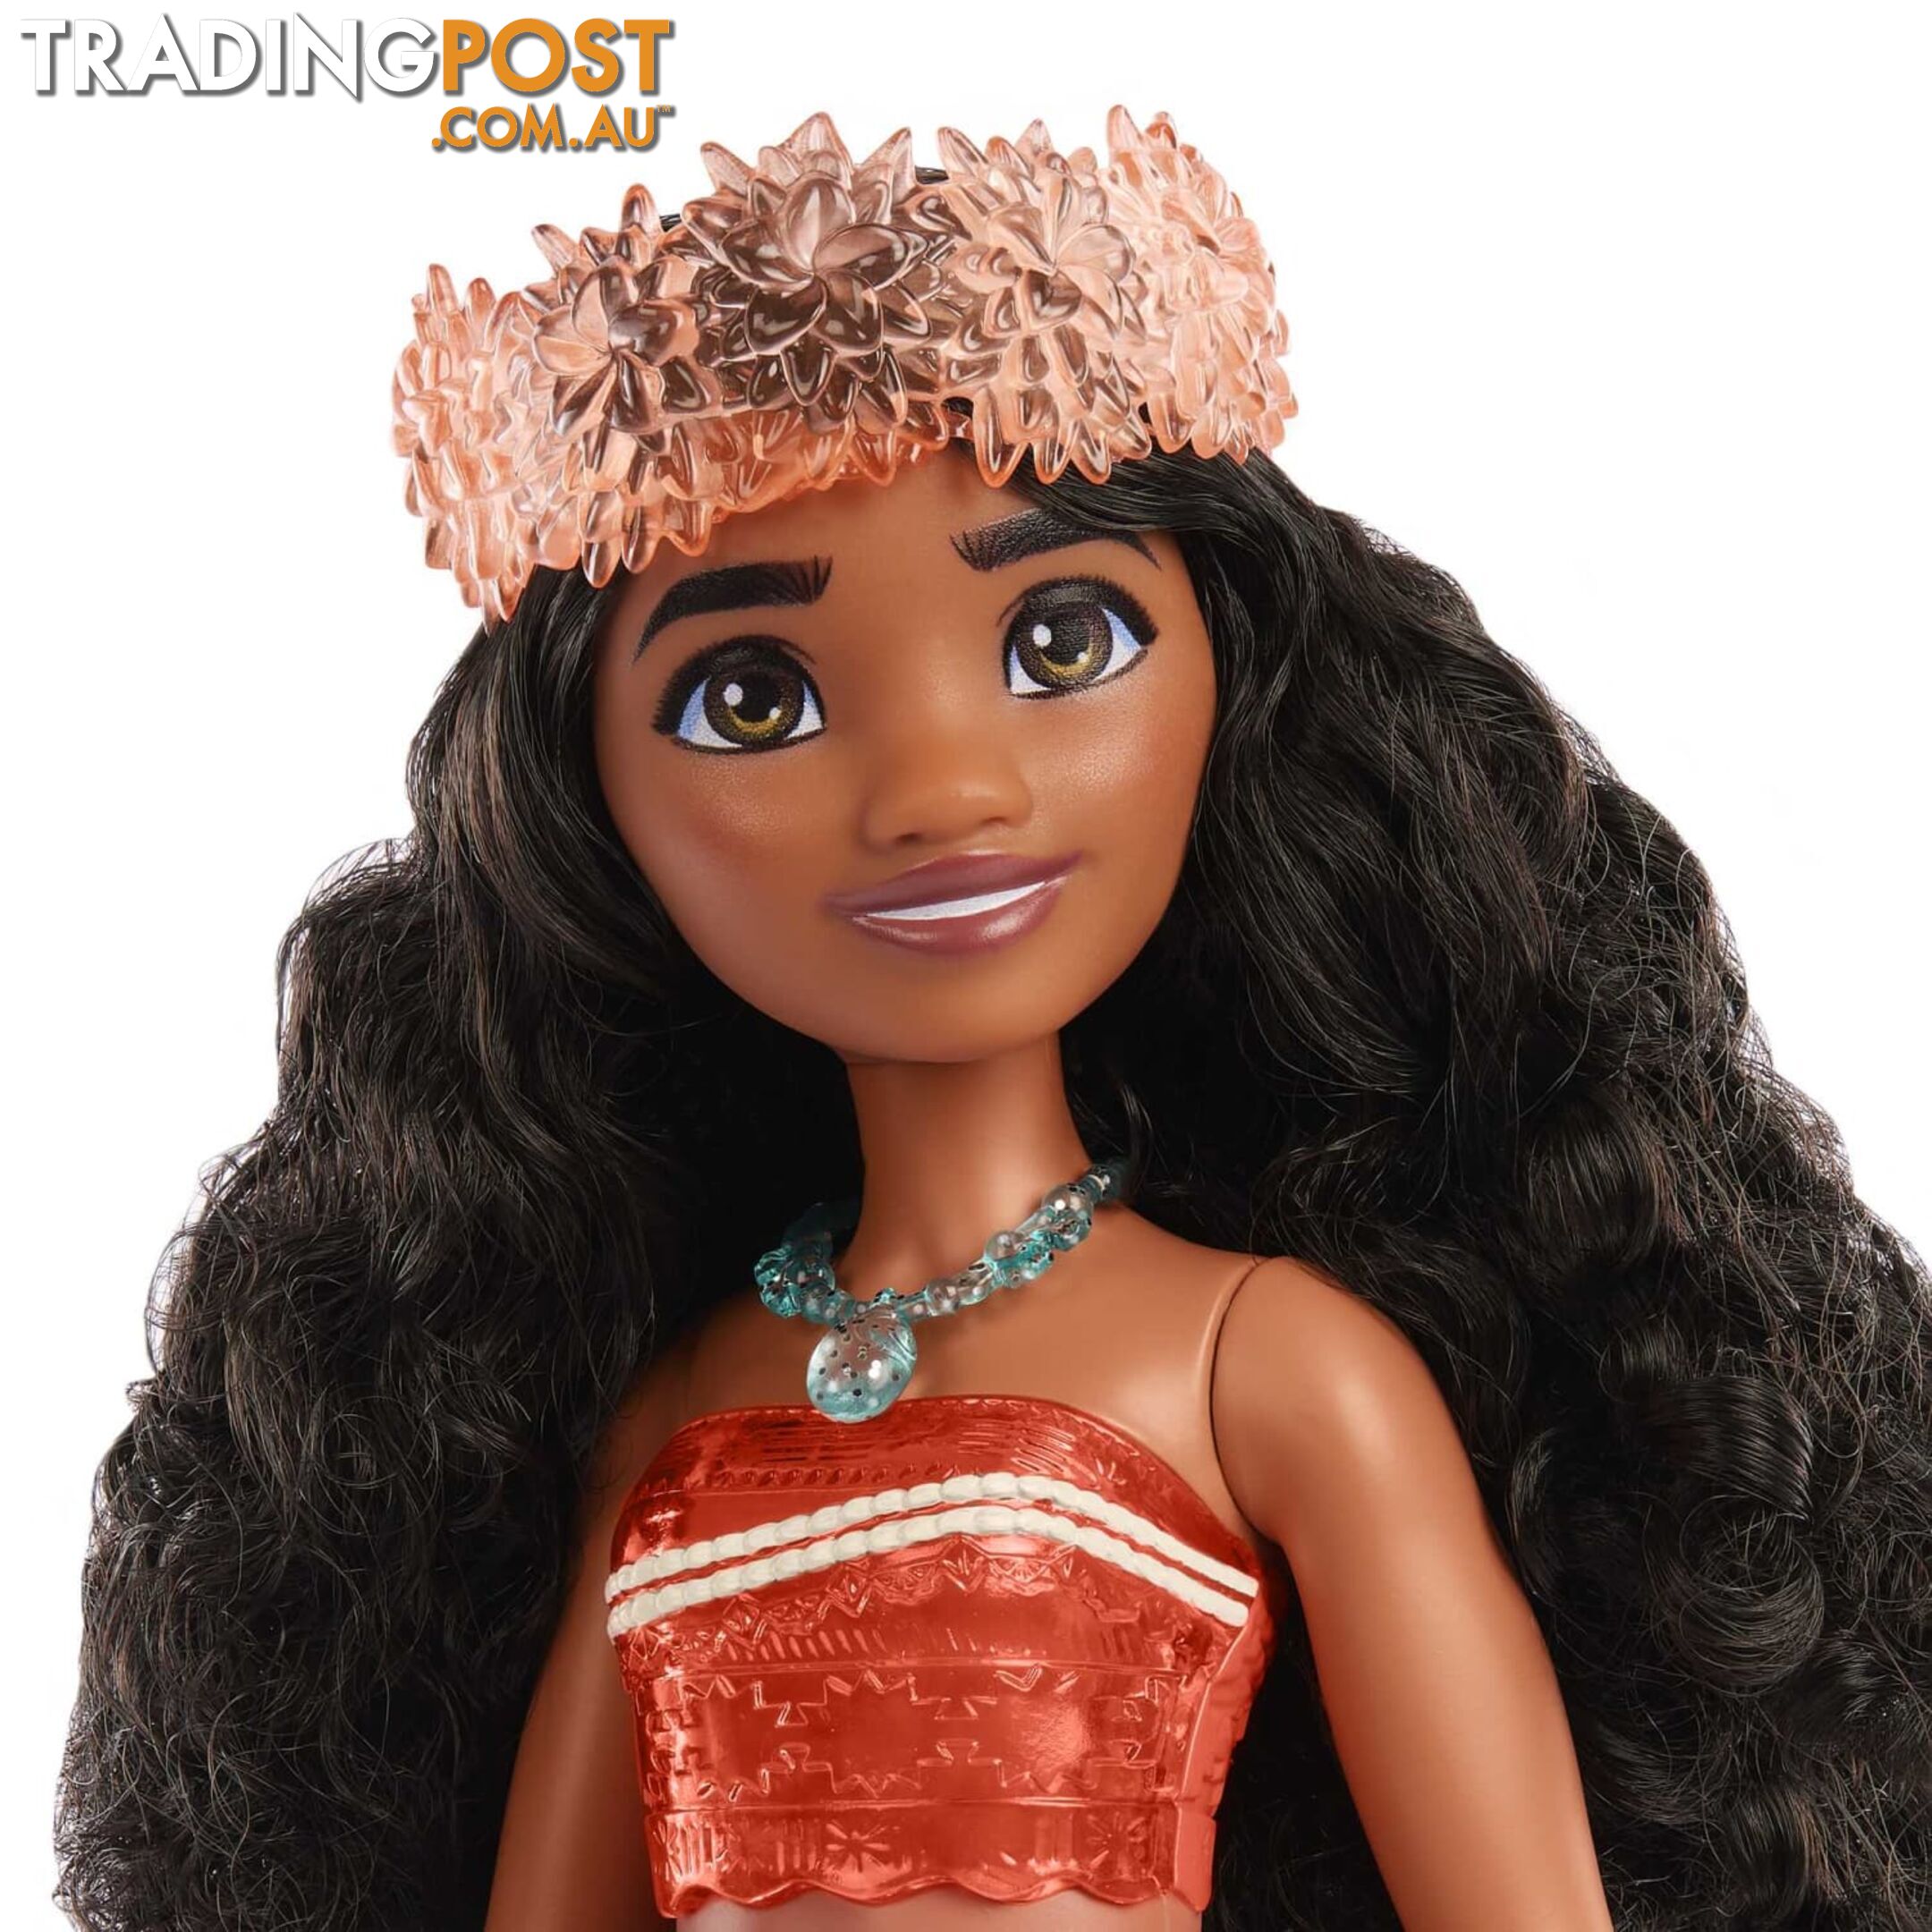 Disney Princess Moana Fashion Doll And Accessories - New For 2023 - Mahlw05 - 194735120321